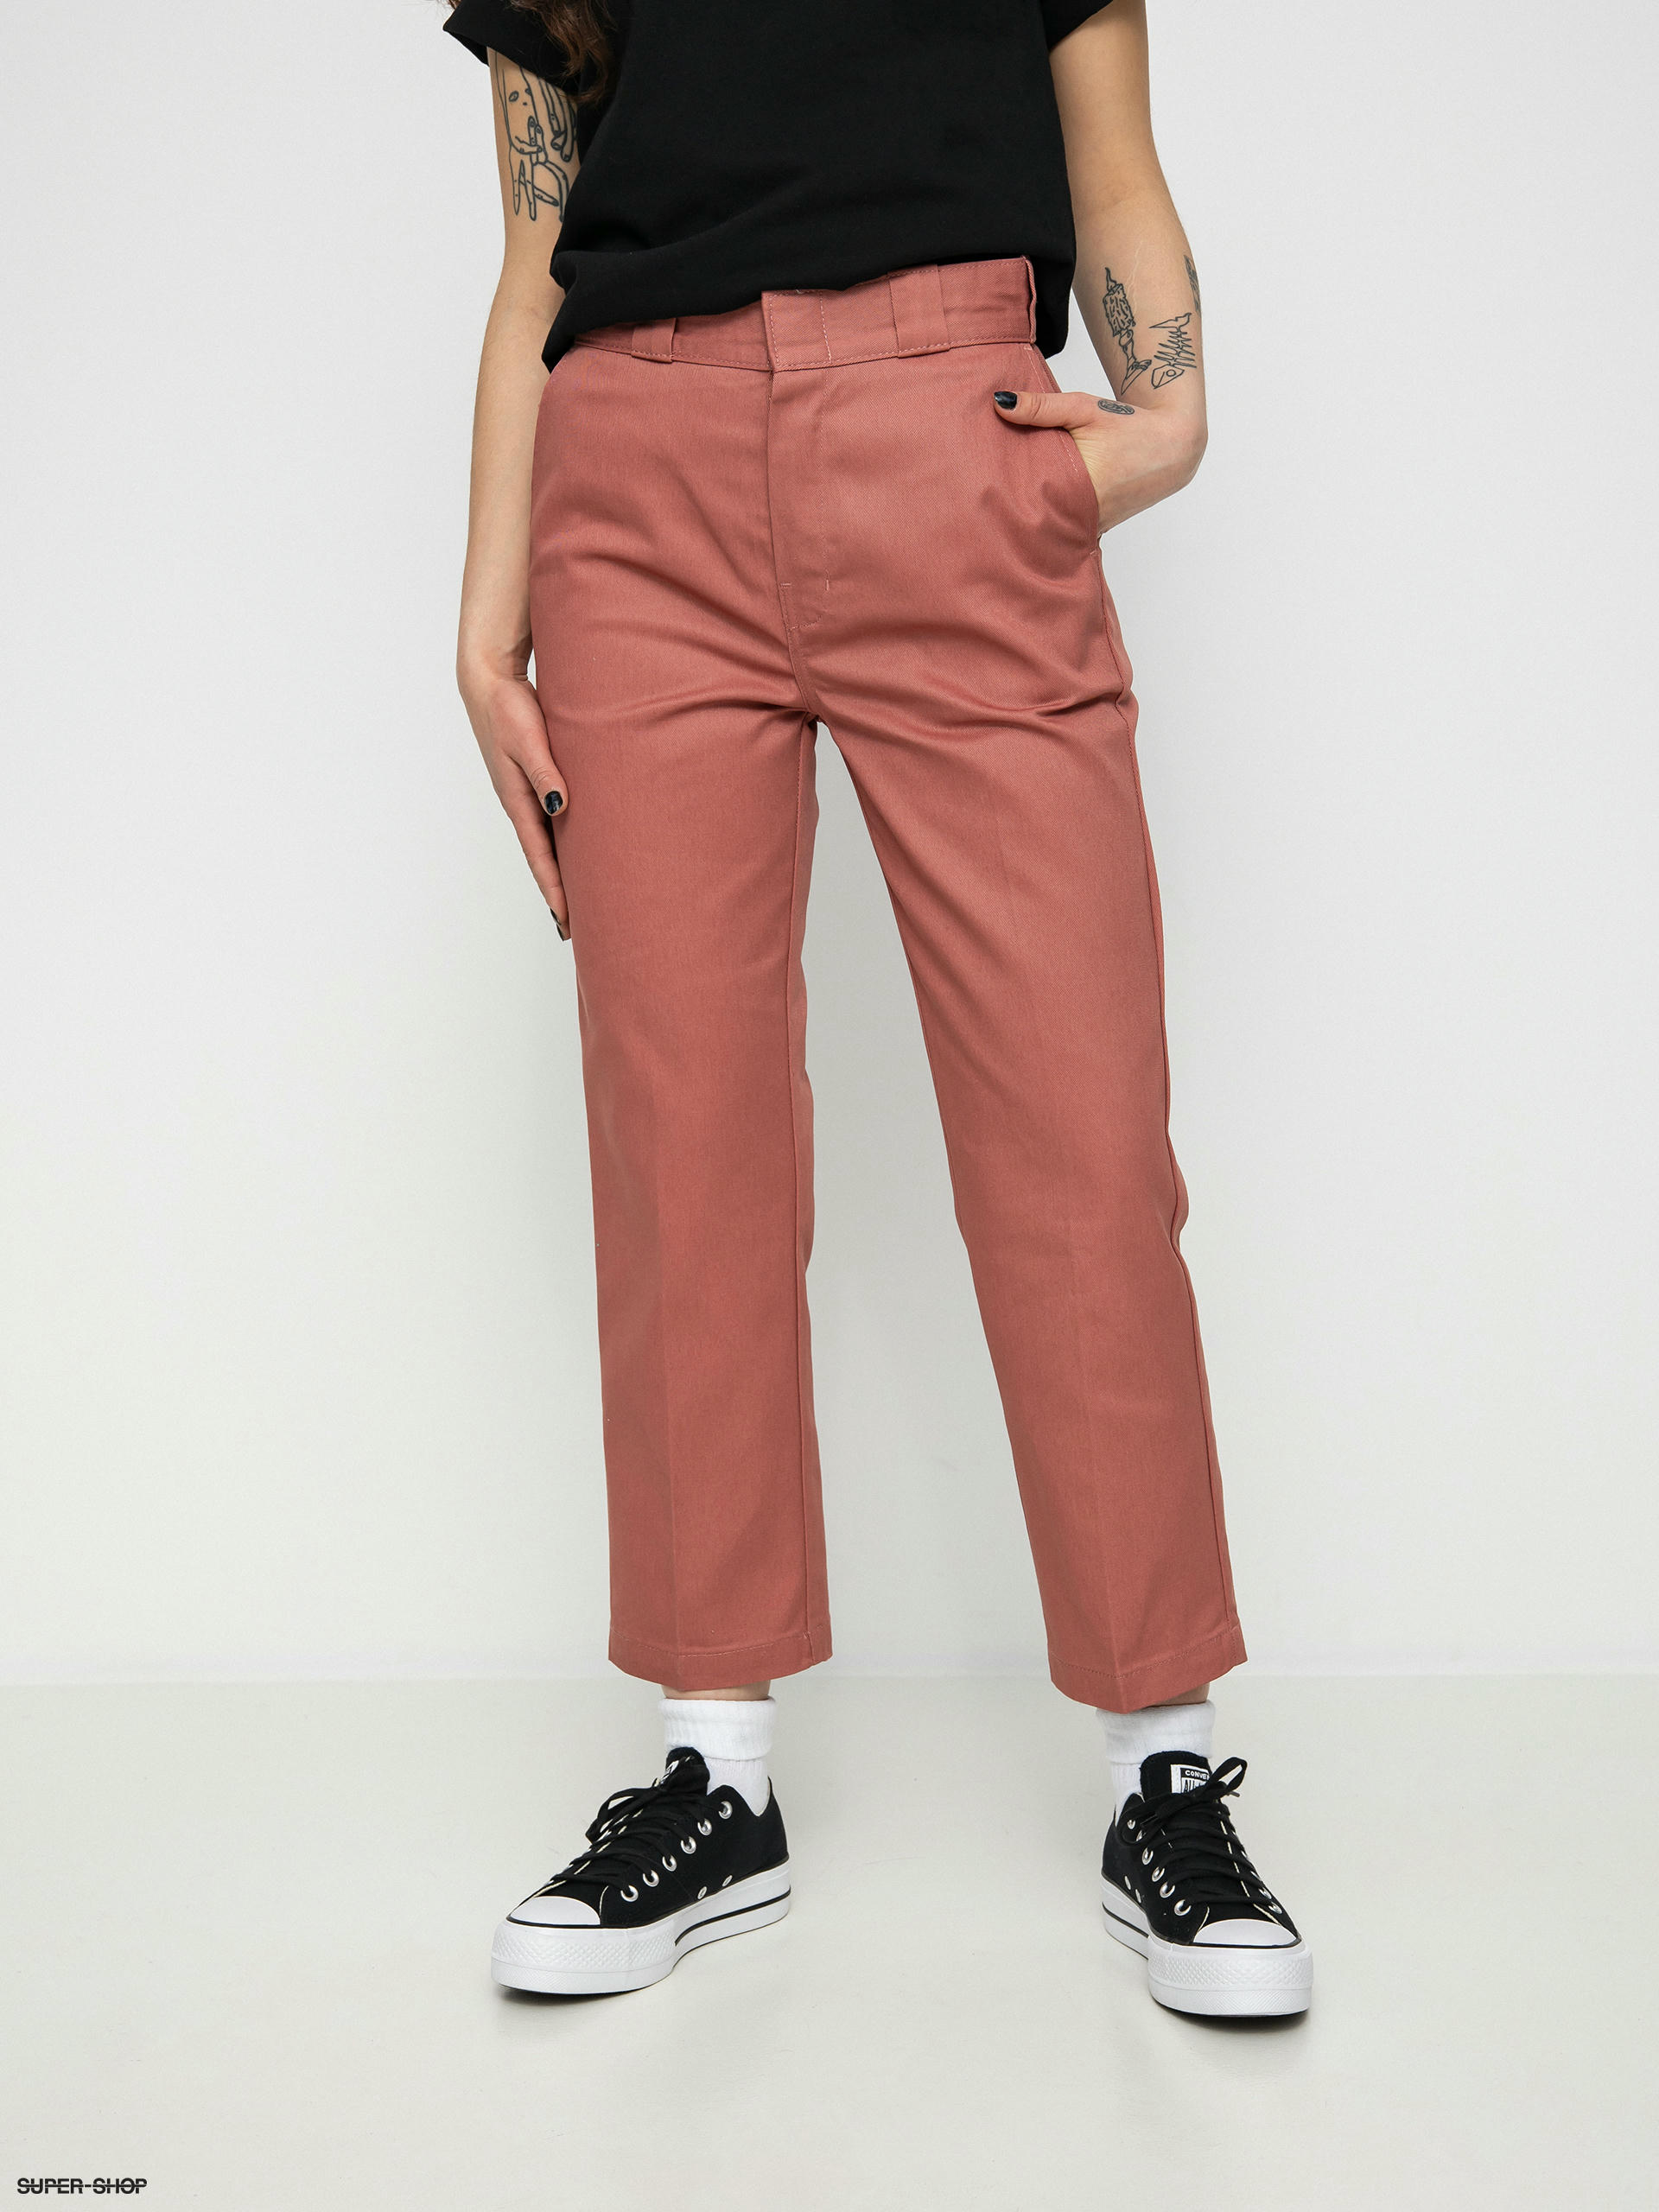 Stolthed Mart kedel Dickies 874 Cropped Pants Wmn (withered rose)